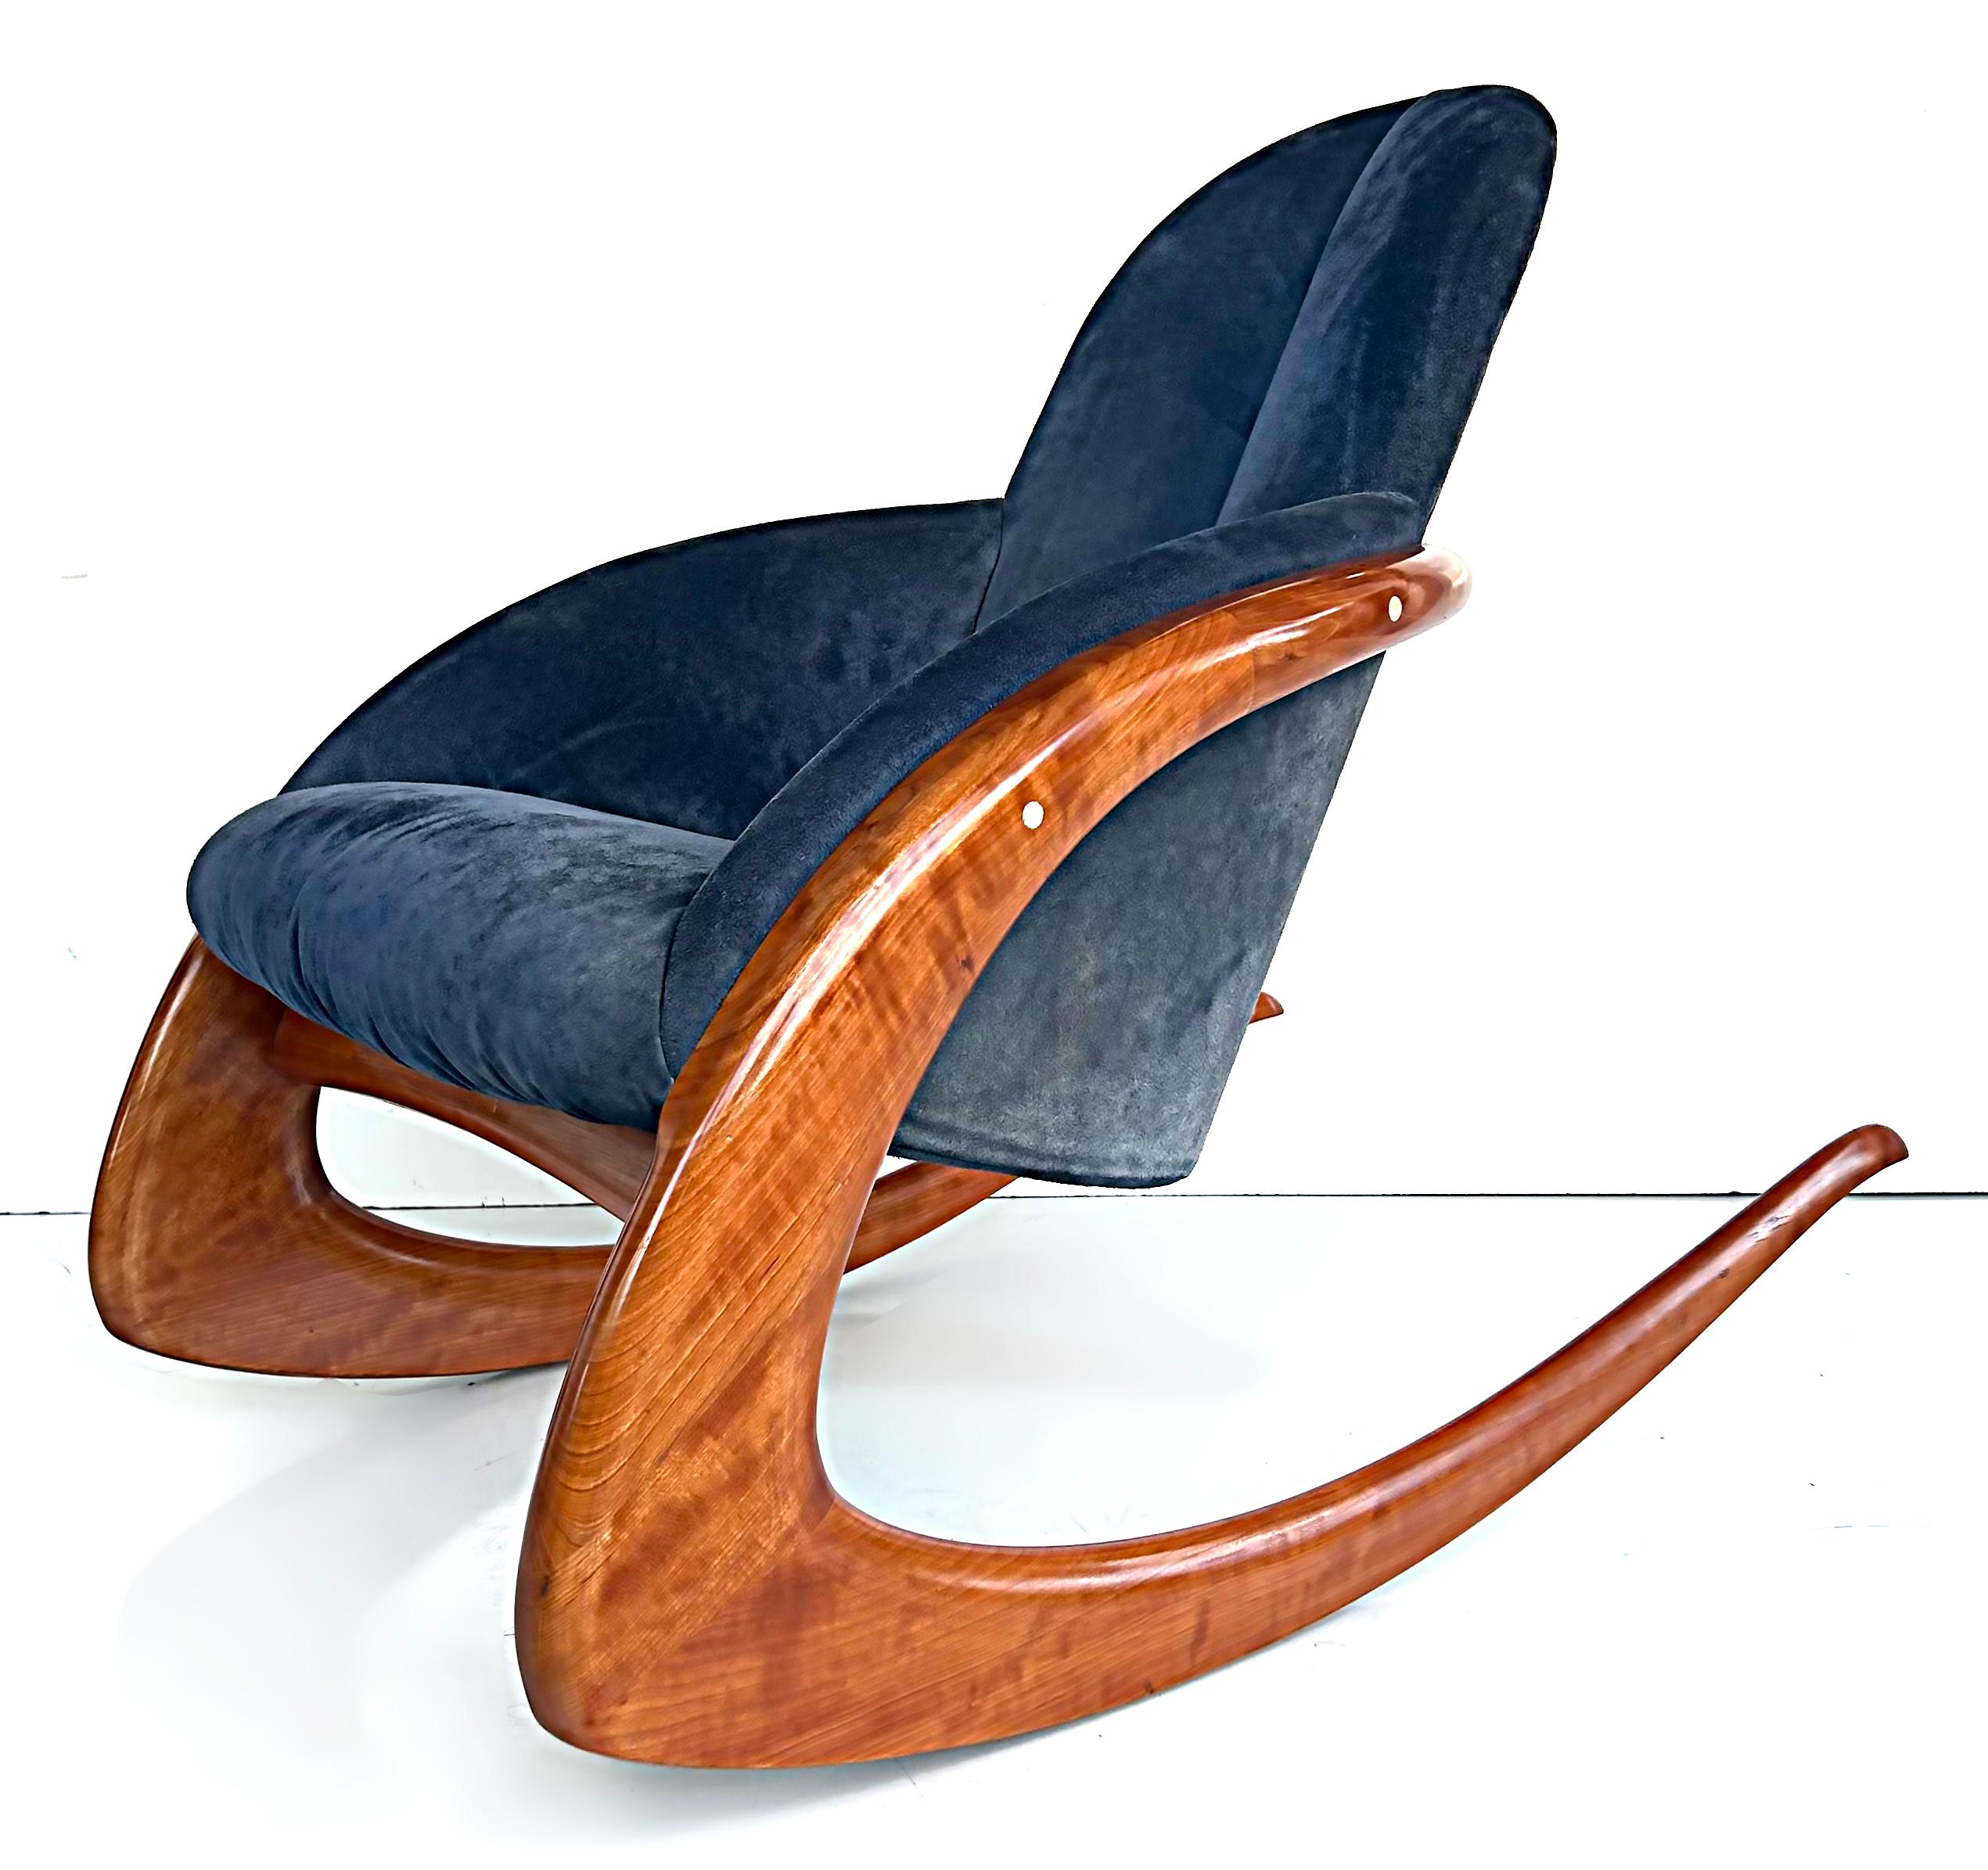 Wendell Castle Crescent Moon Wood and Suede Rocking Chair In Good Condition For Sale In Miami, FL